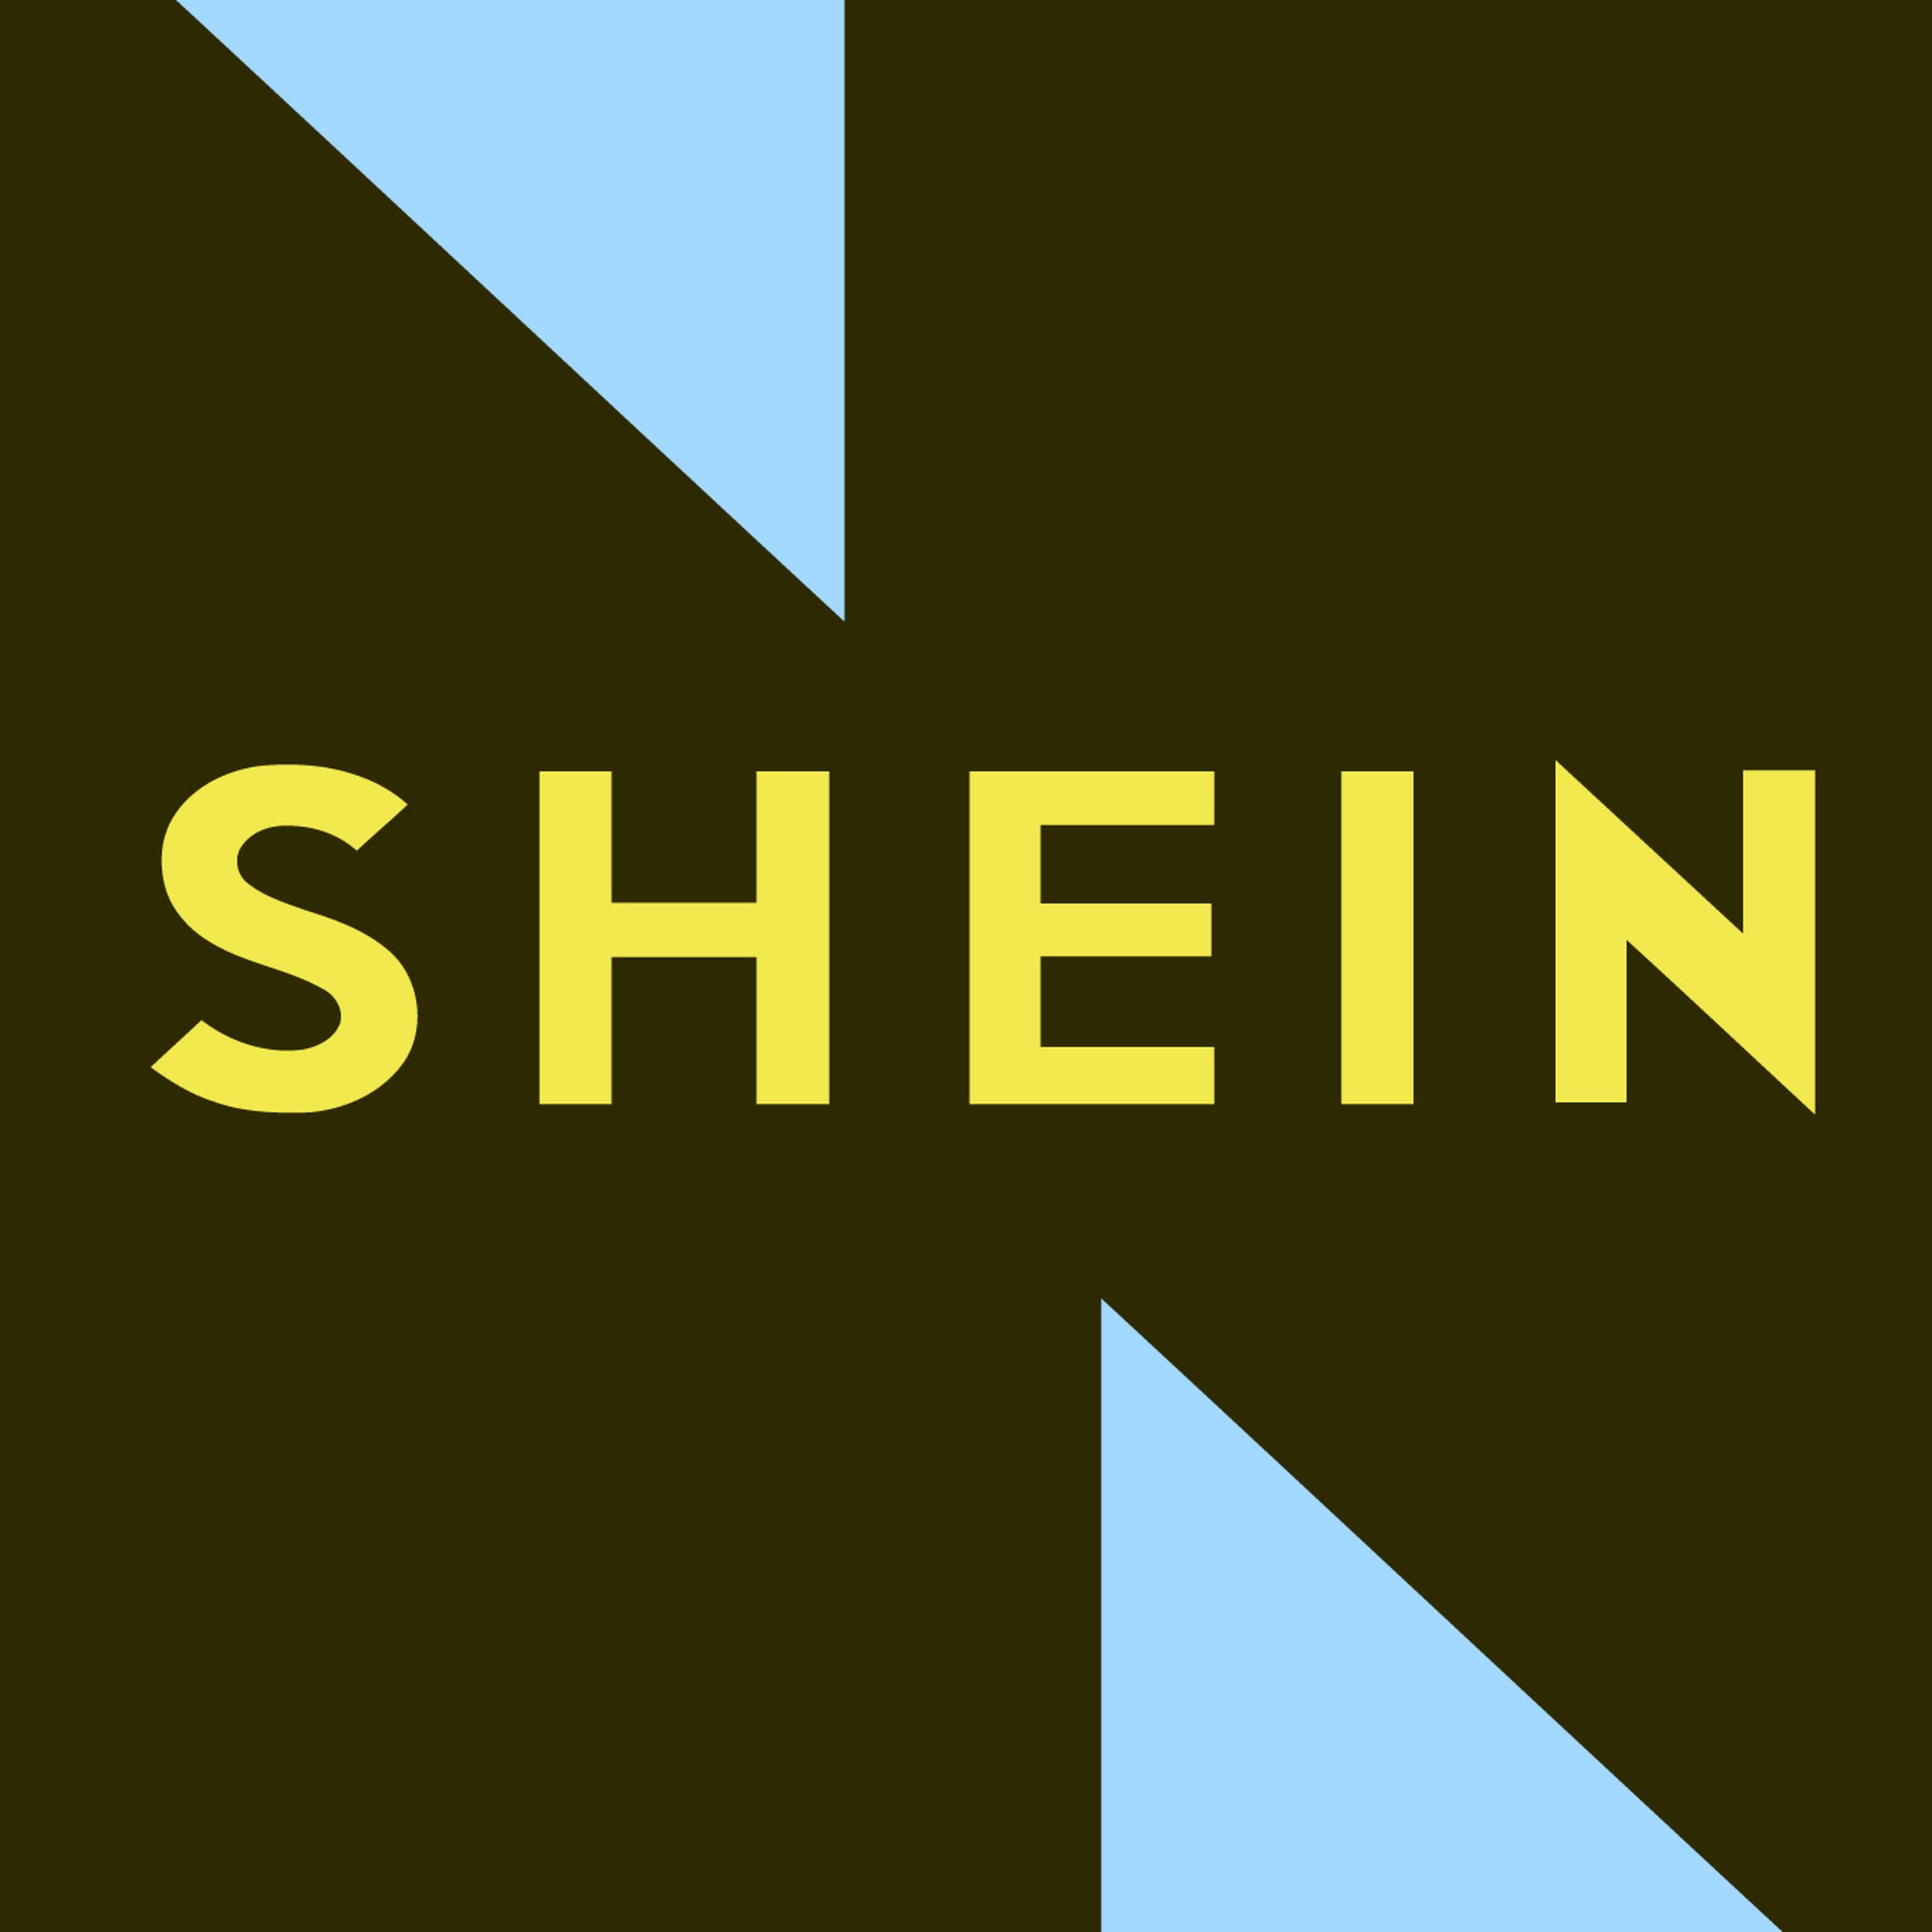 Shein logo over blue, yellow, and brown geometric background.